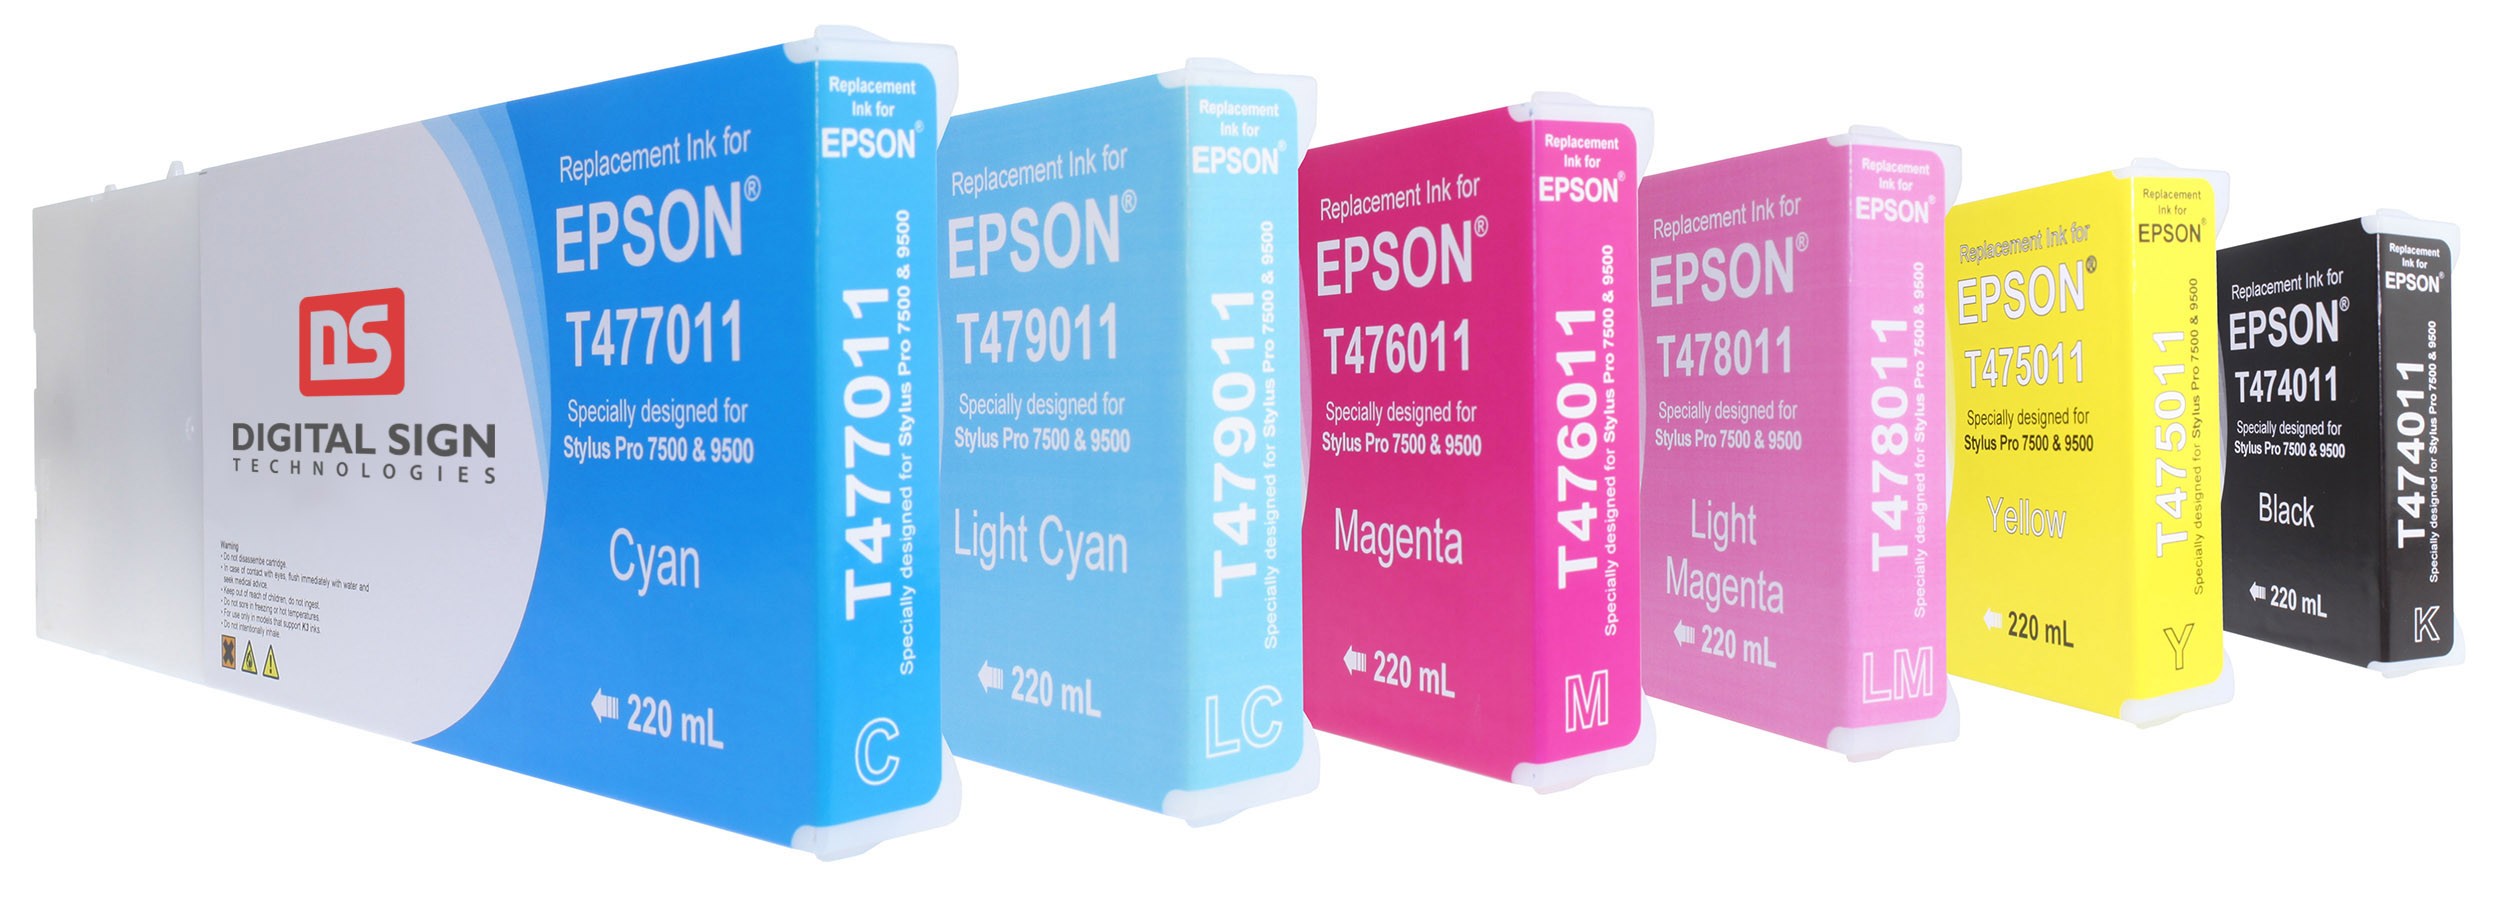 Epson Archival K2 Ink Cartridges by DST